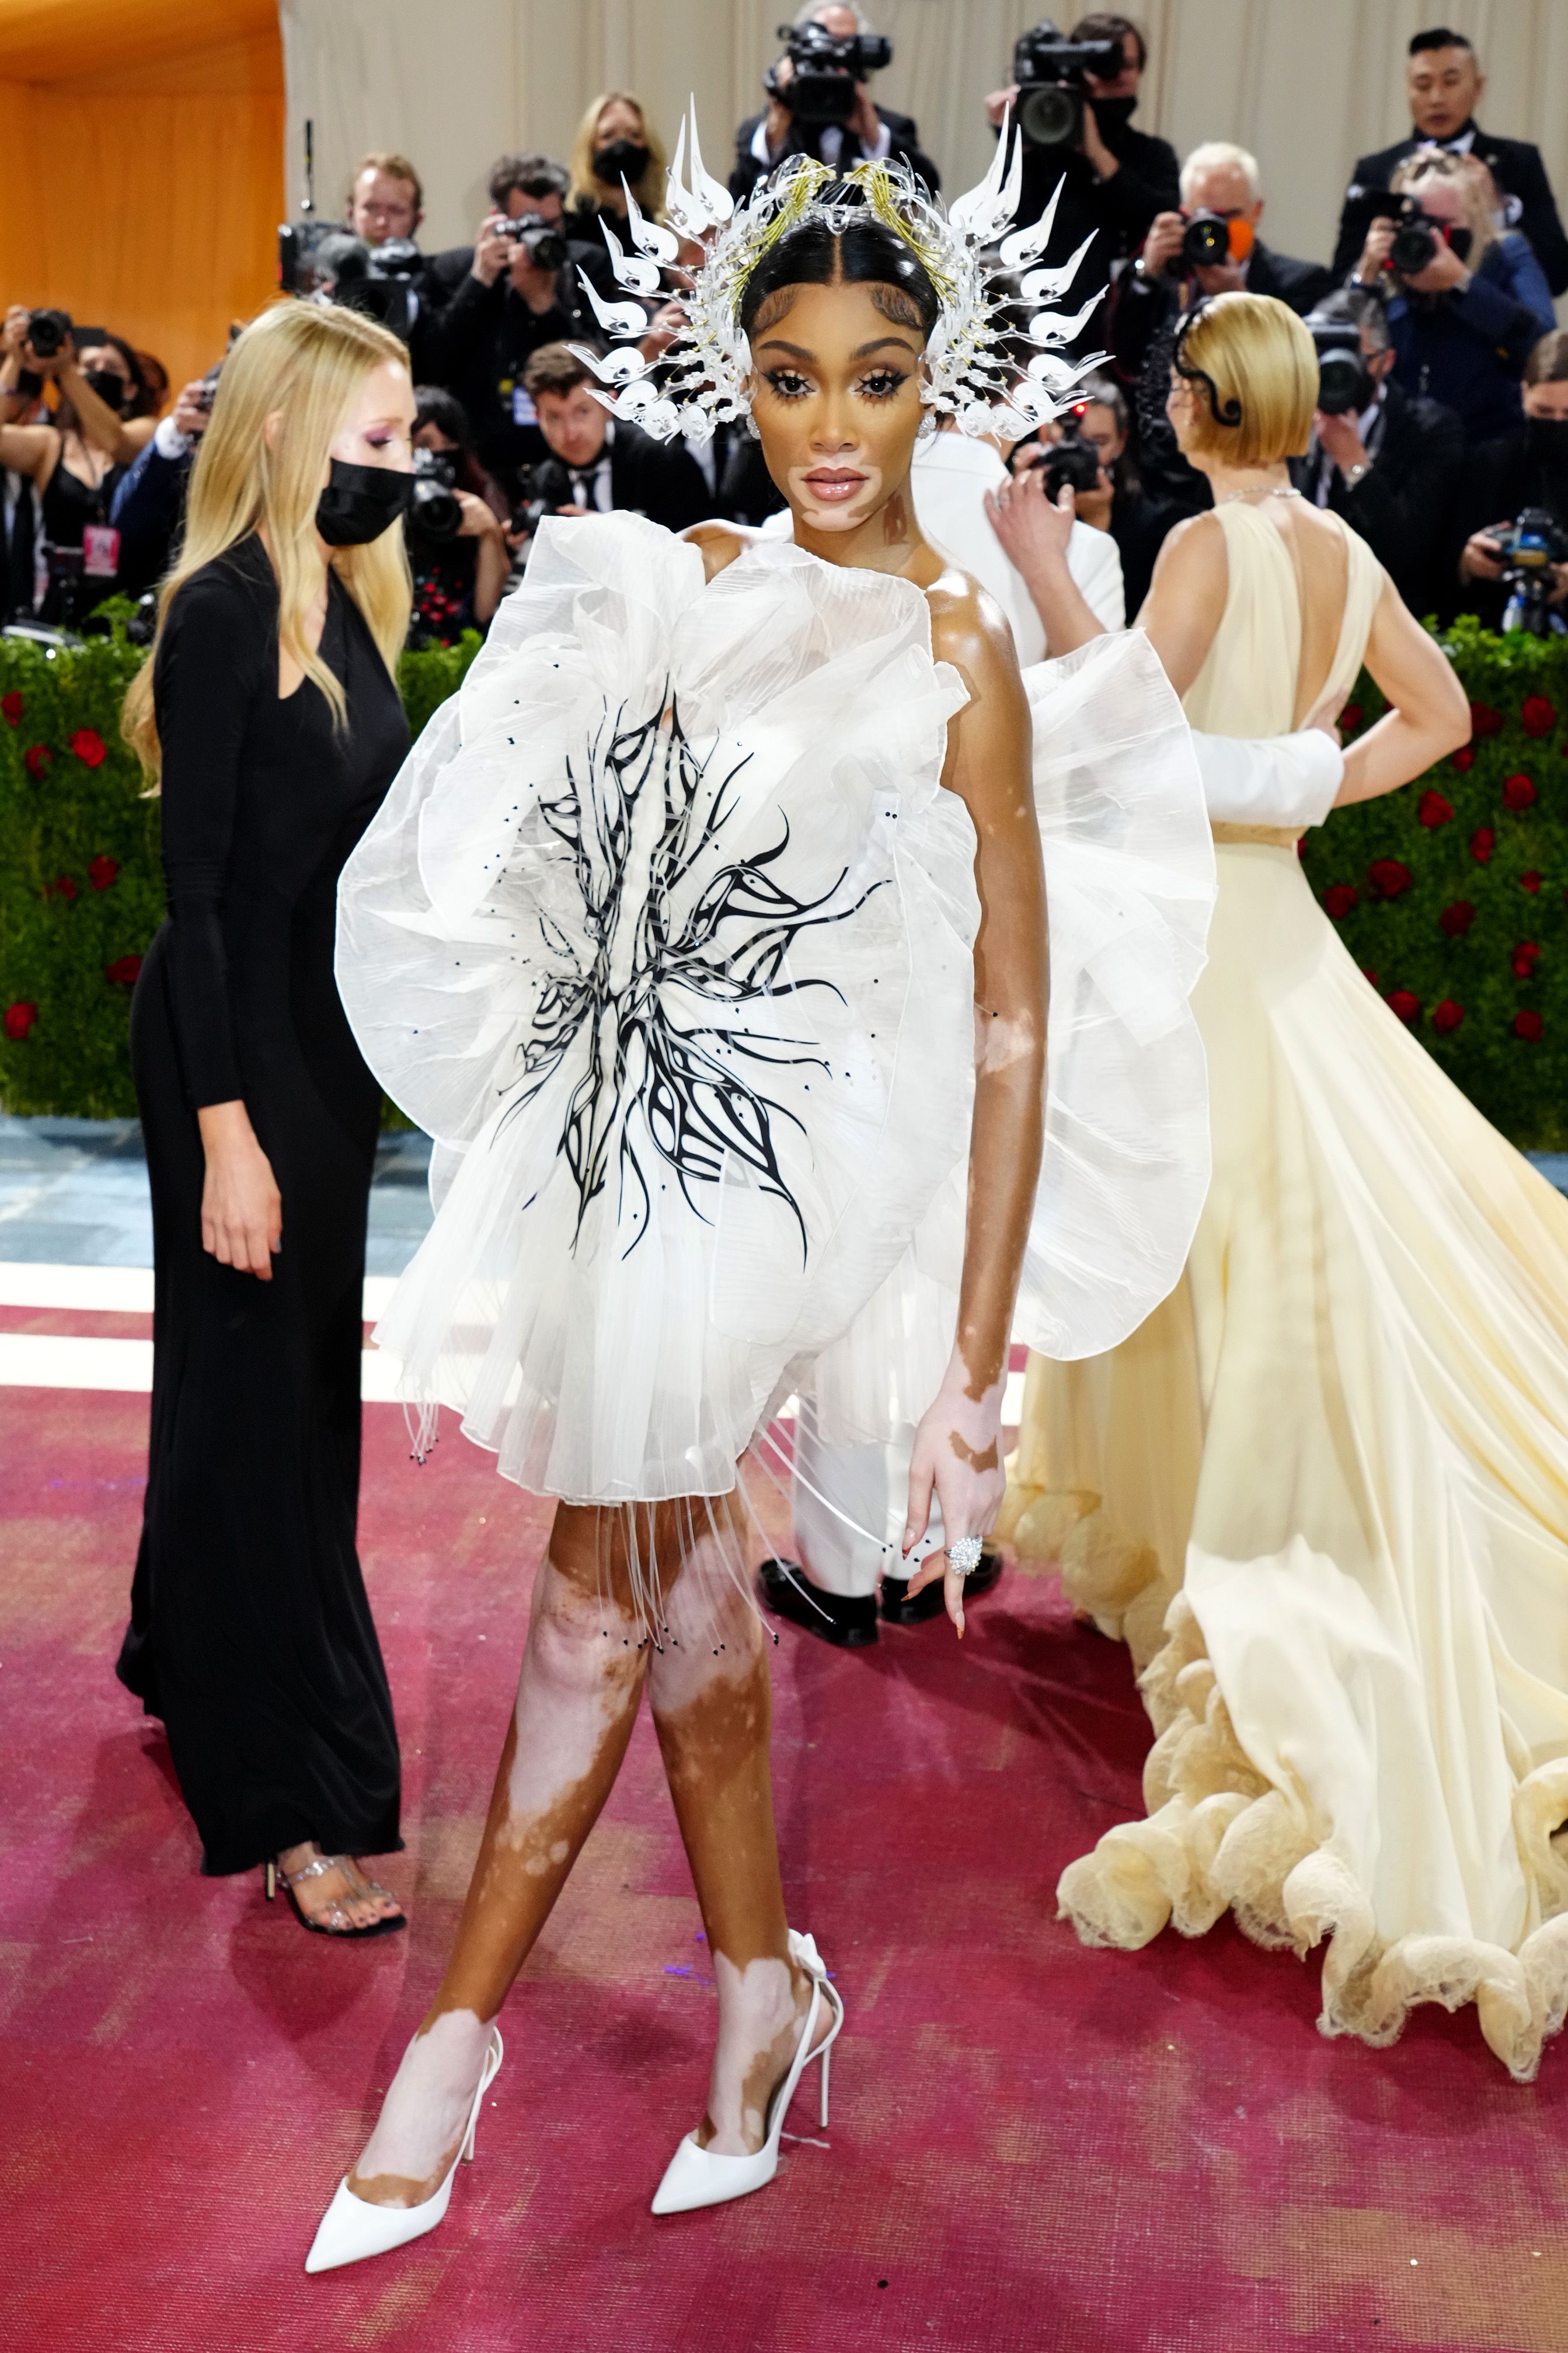 Met Gala 2022: The most fun, outrageous looks on fashion's biggest